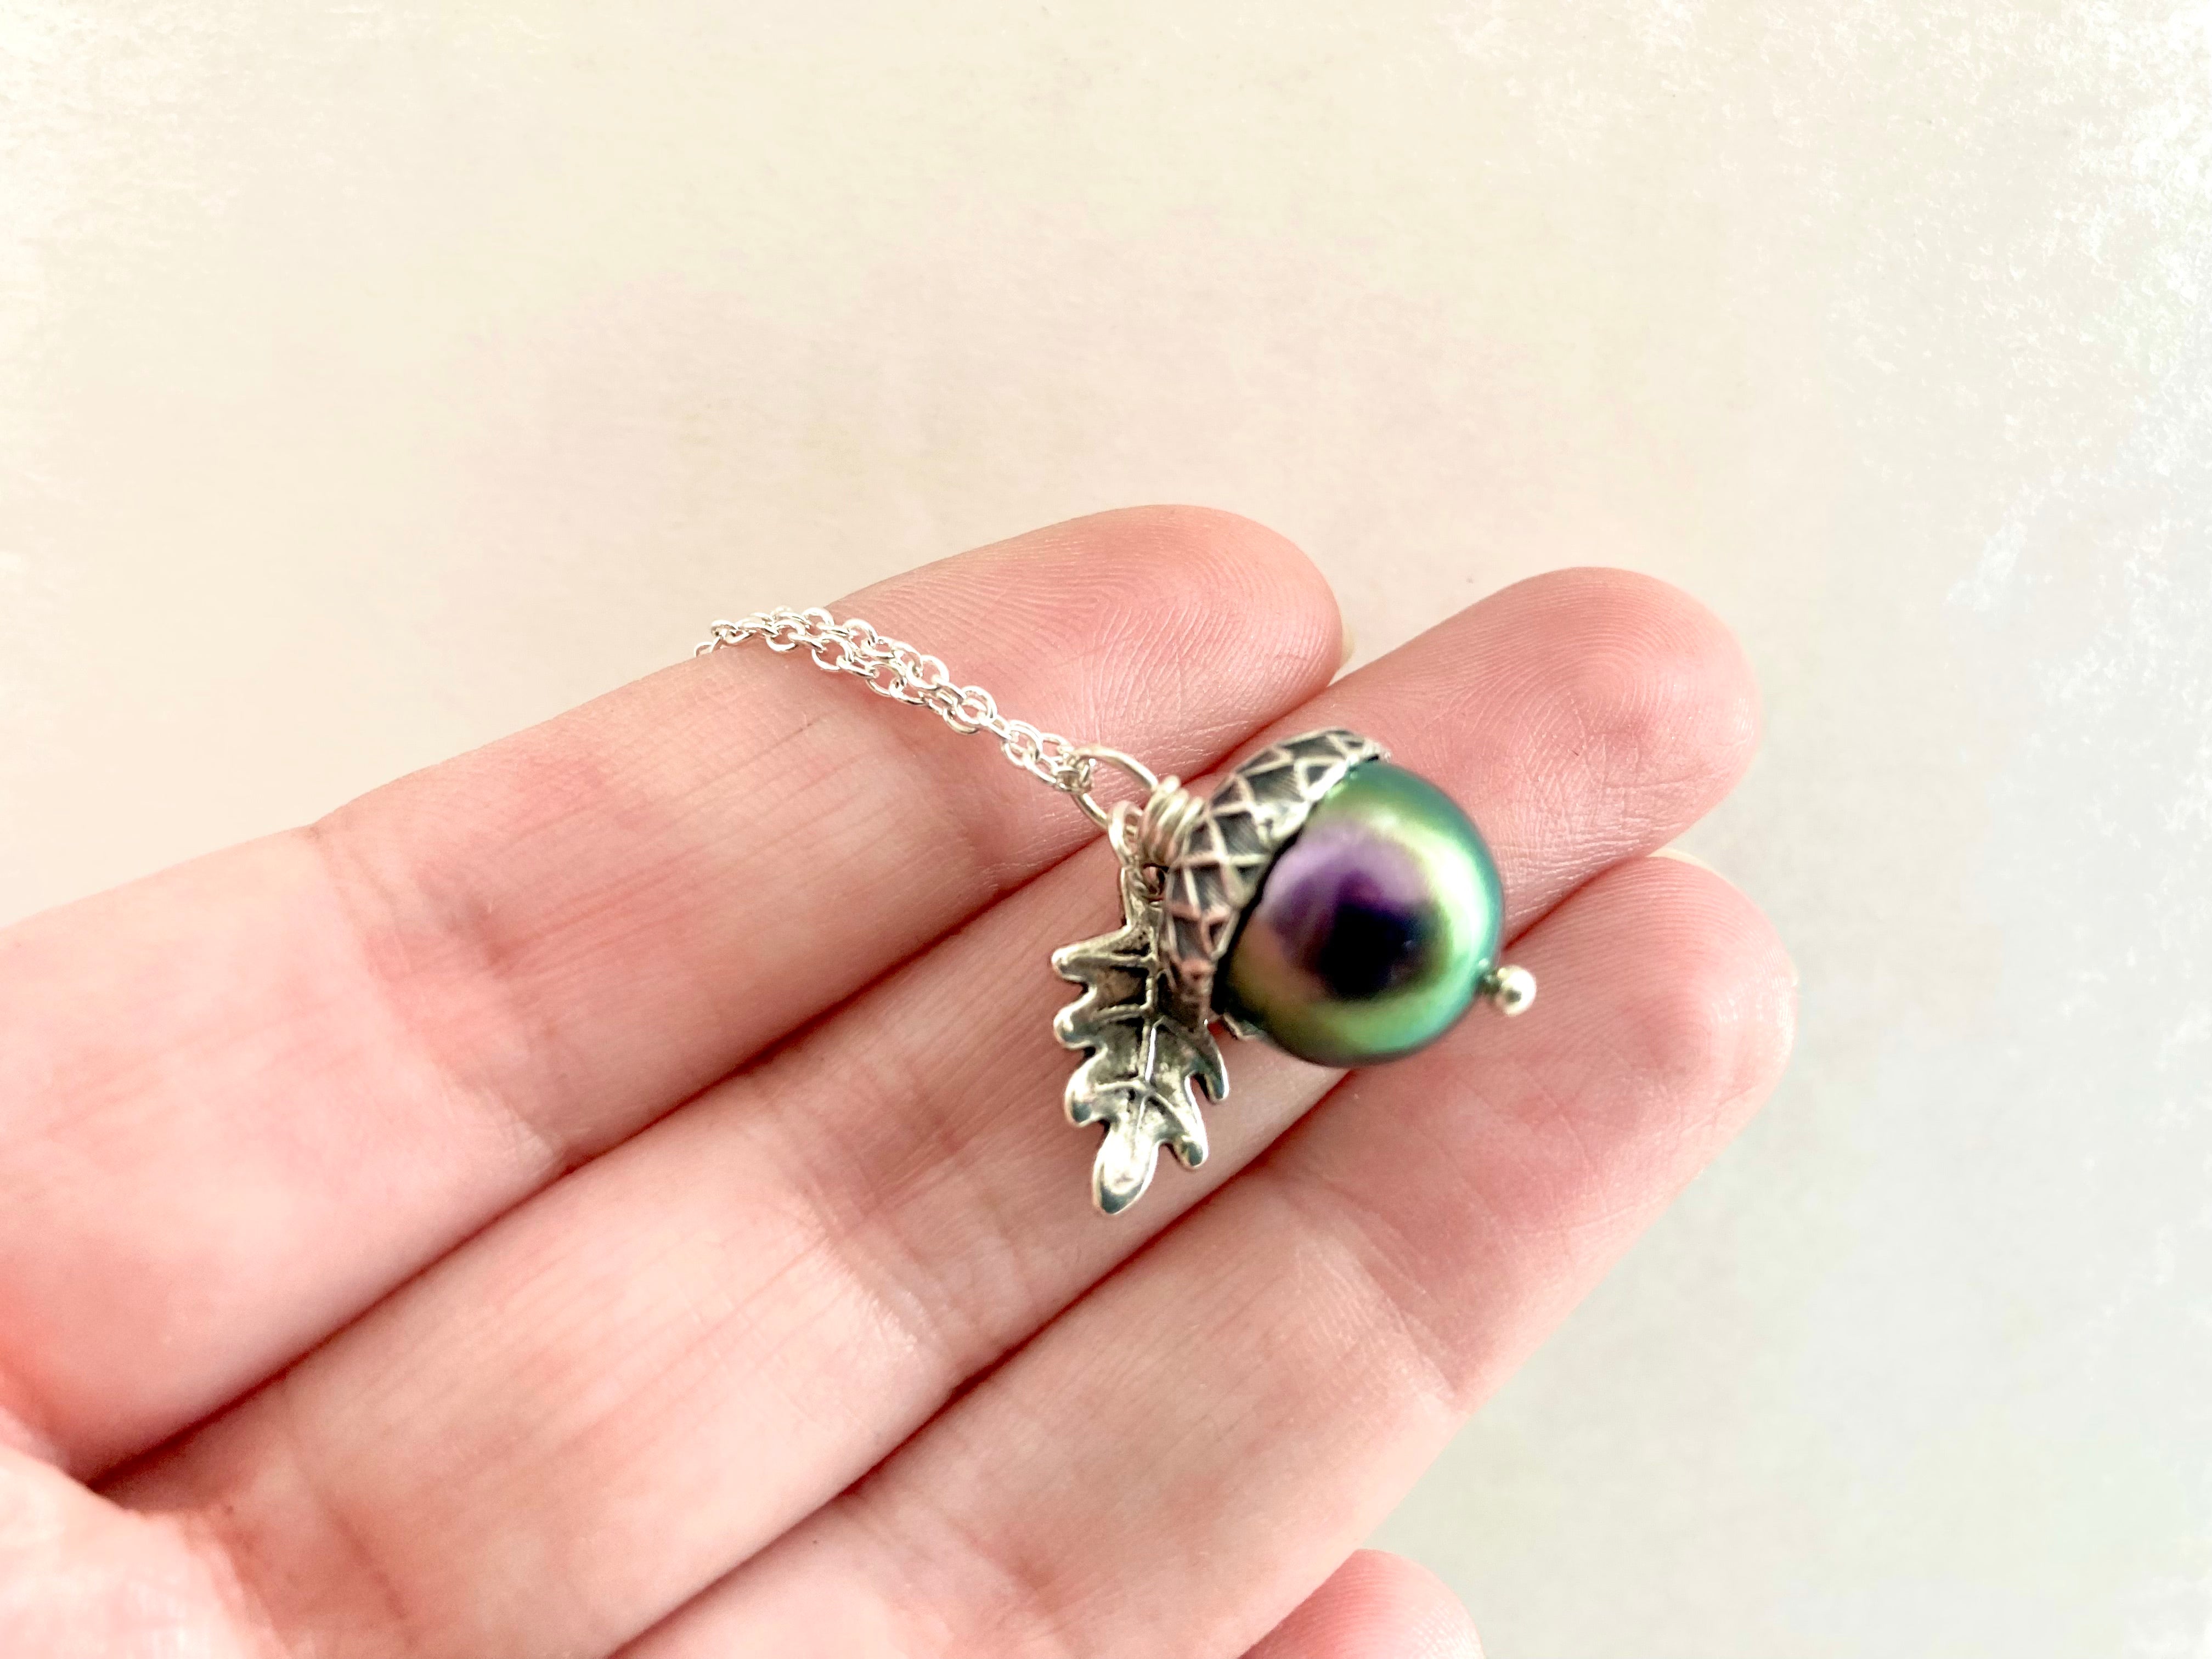 Silver Bewitched Magic Acorn Necklace | Iridescent Purple and Green Acorn Pendant | Forest Nature Jewelry